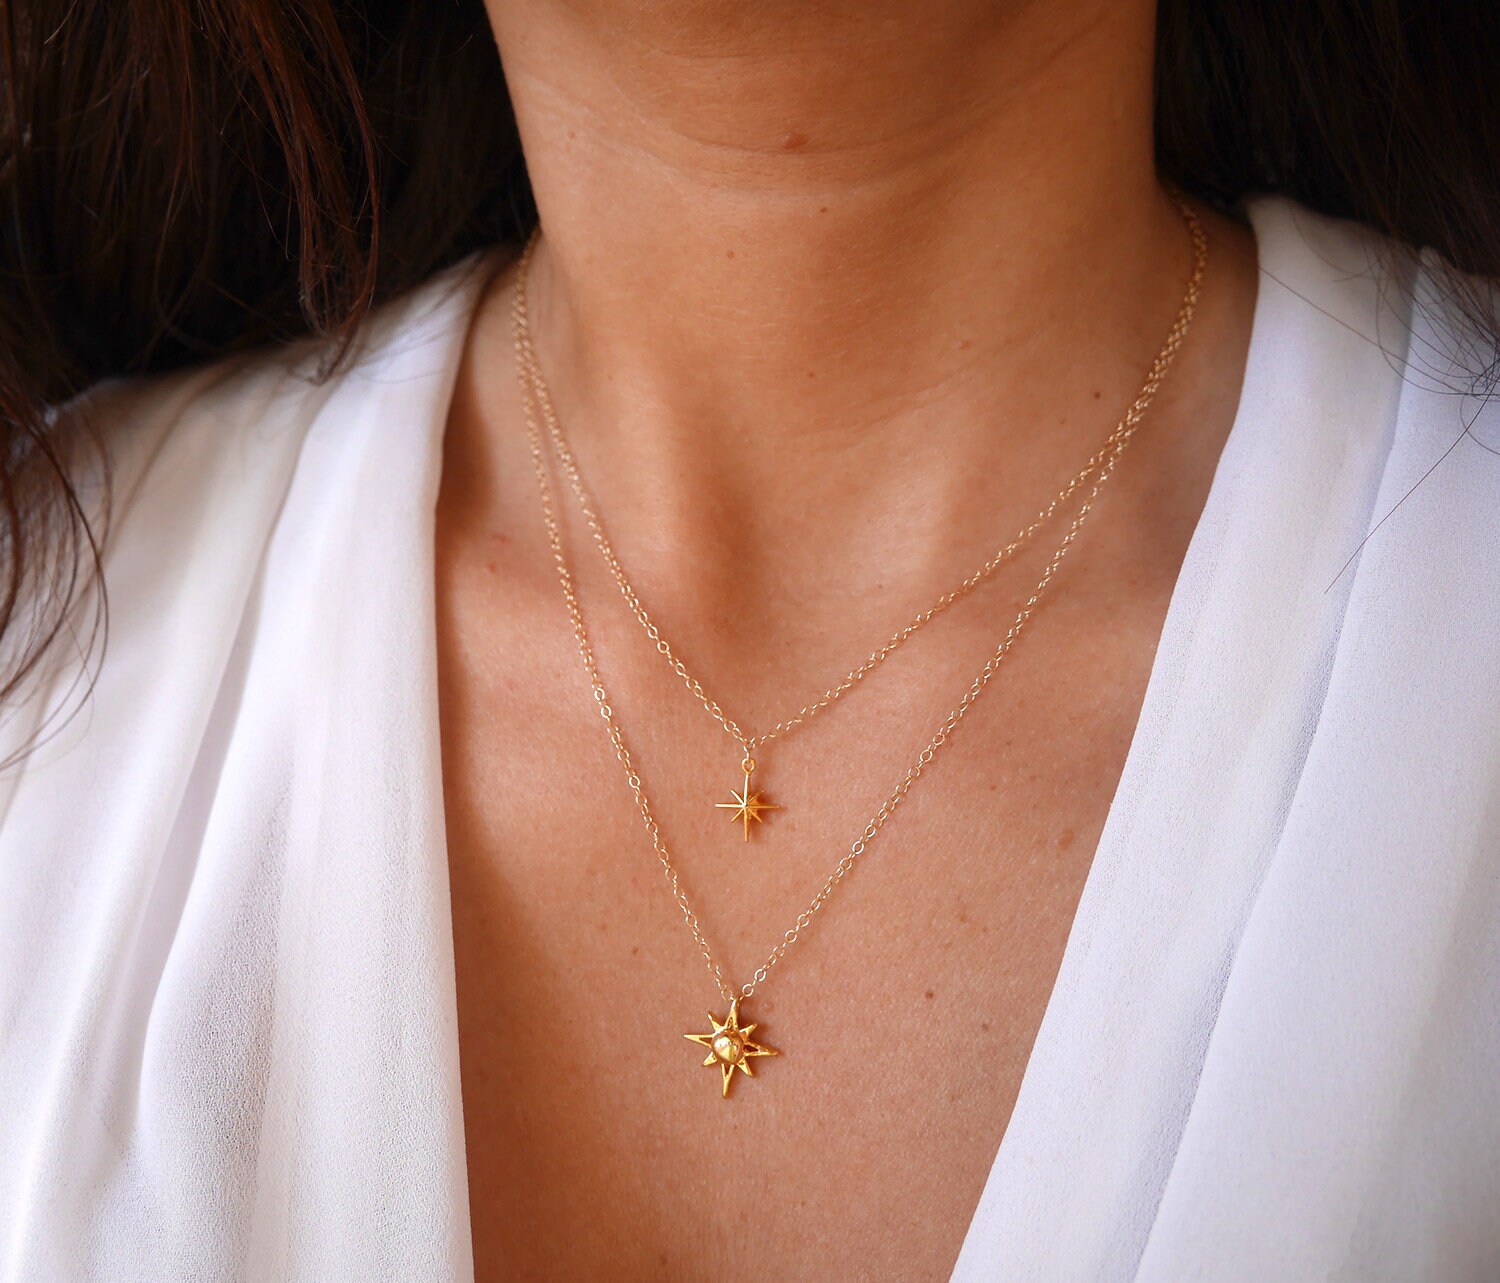 14K Gold Star Necklace, north Star Necklace, Solid Gold Necklace, Diamond Star  Necklace, Diamond Necklace, Dainty Jewelry, Minimal Jewelry - Etsy